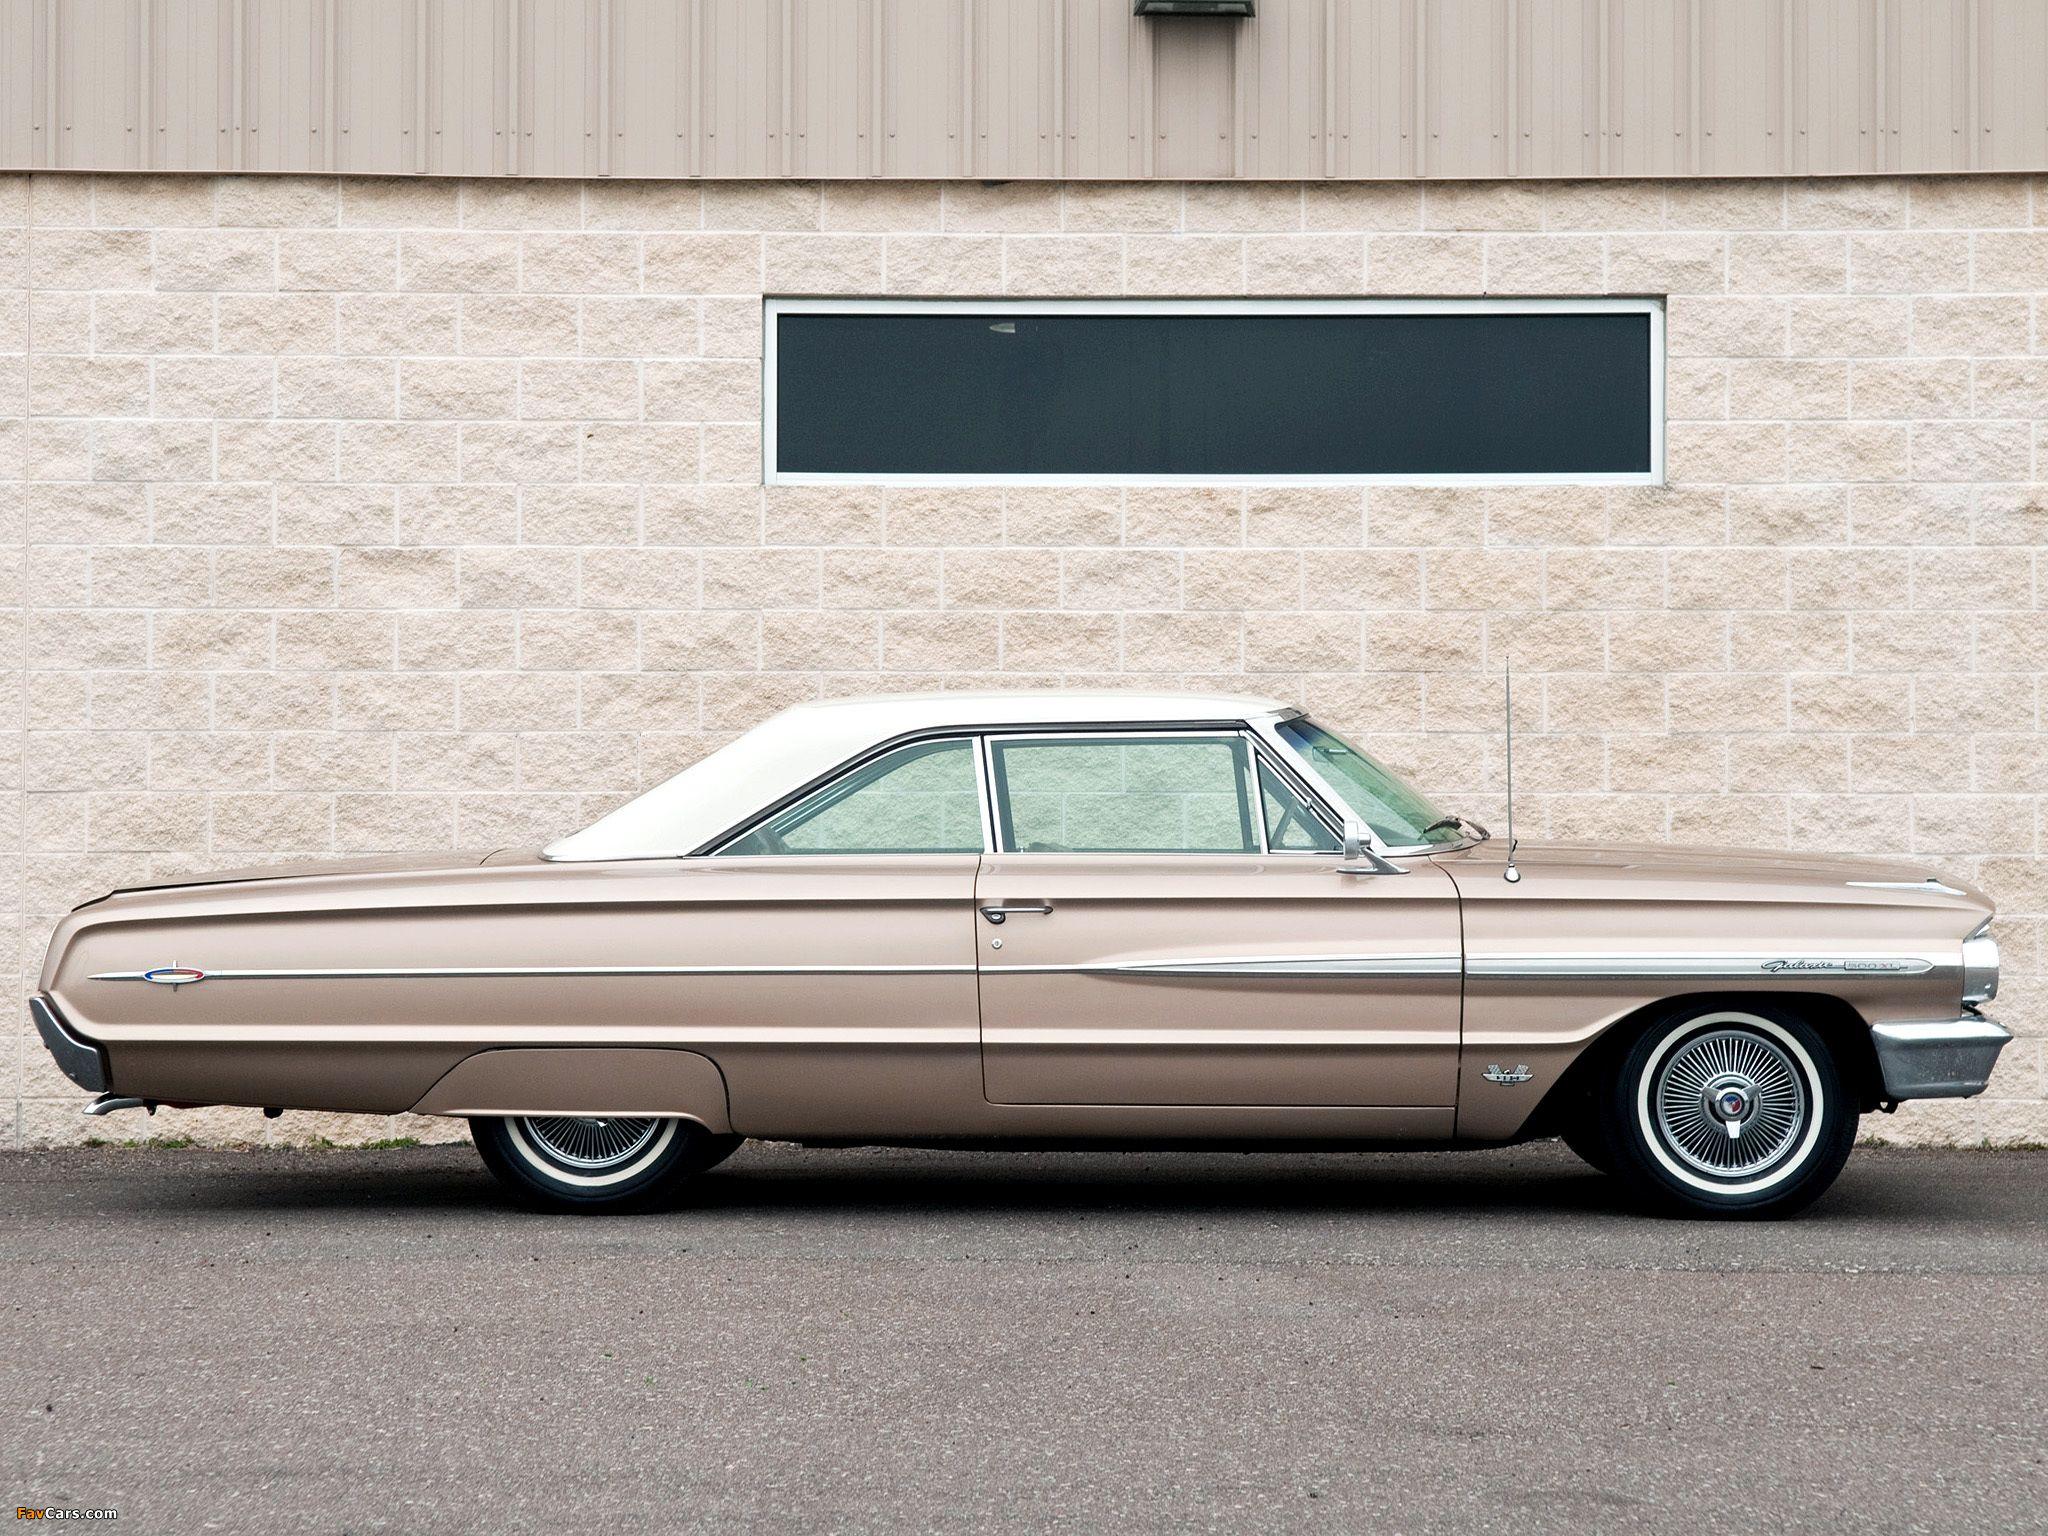 Ford Galaxie 500 XL Hardtop Coupe 1964 wallpaper (2048x1536)